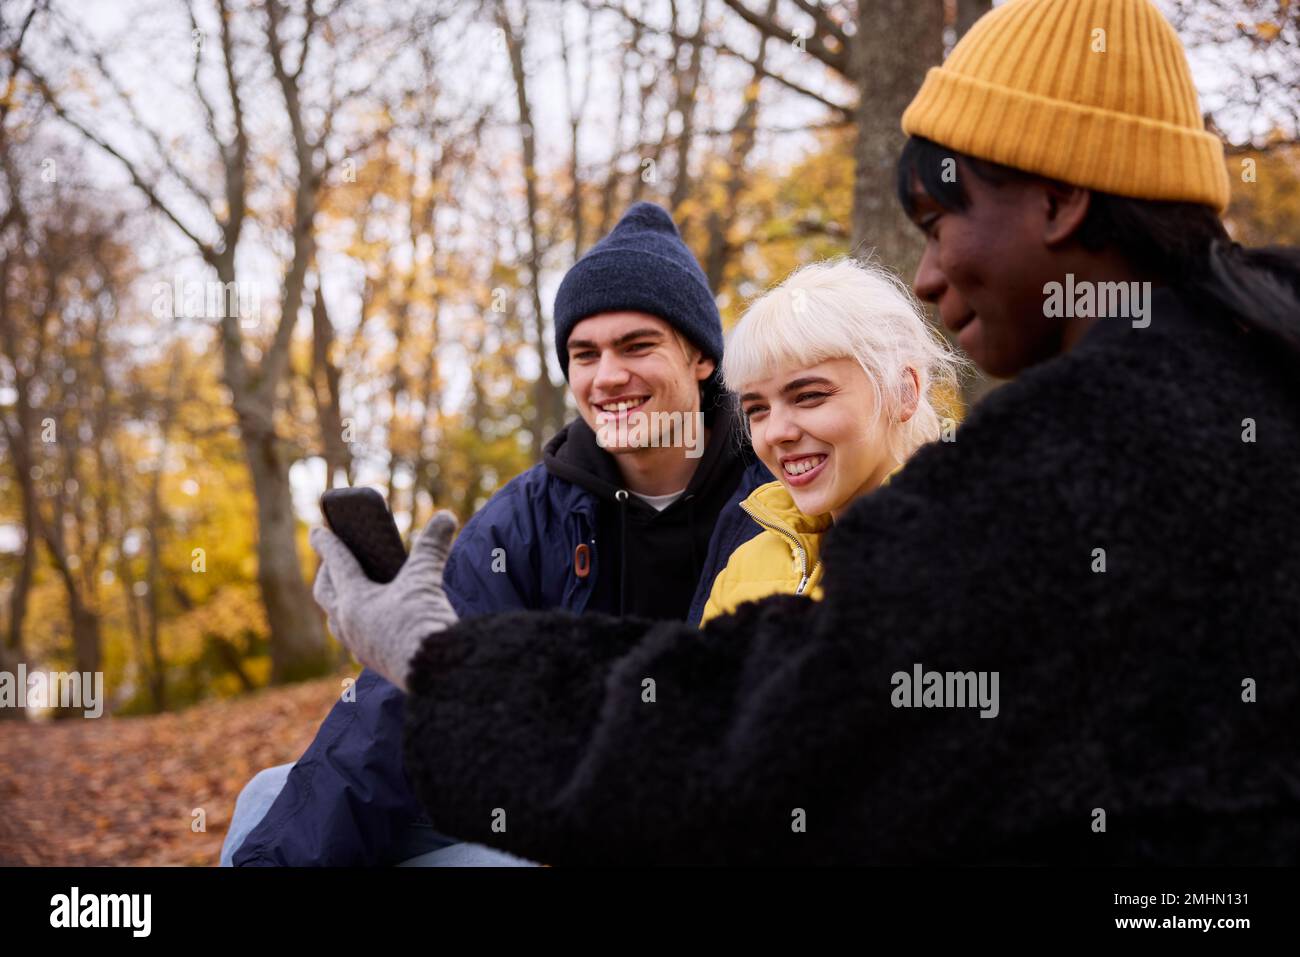 Three friends in park using smartphone Stock Photo